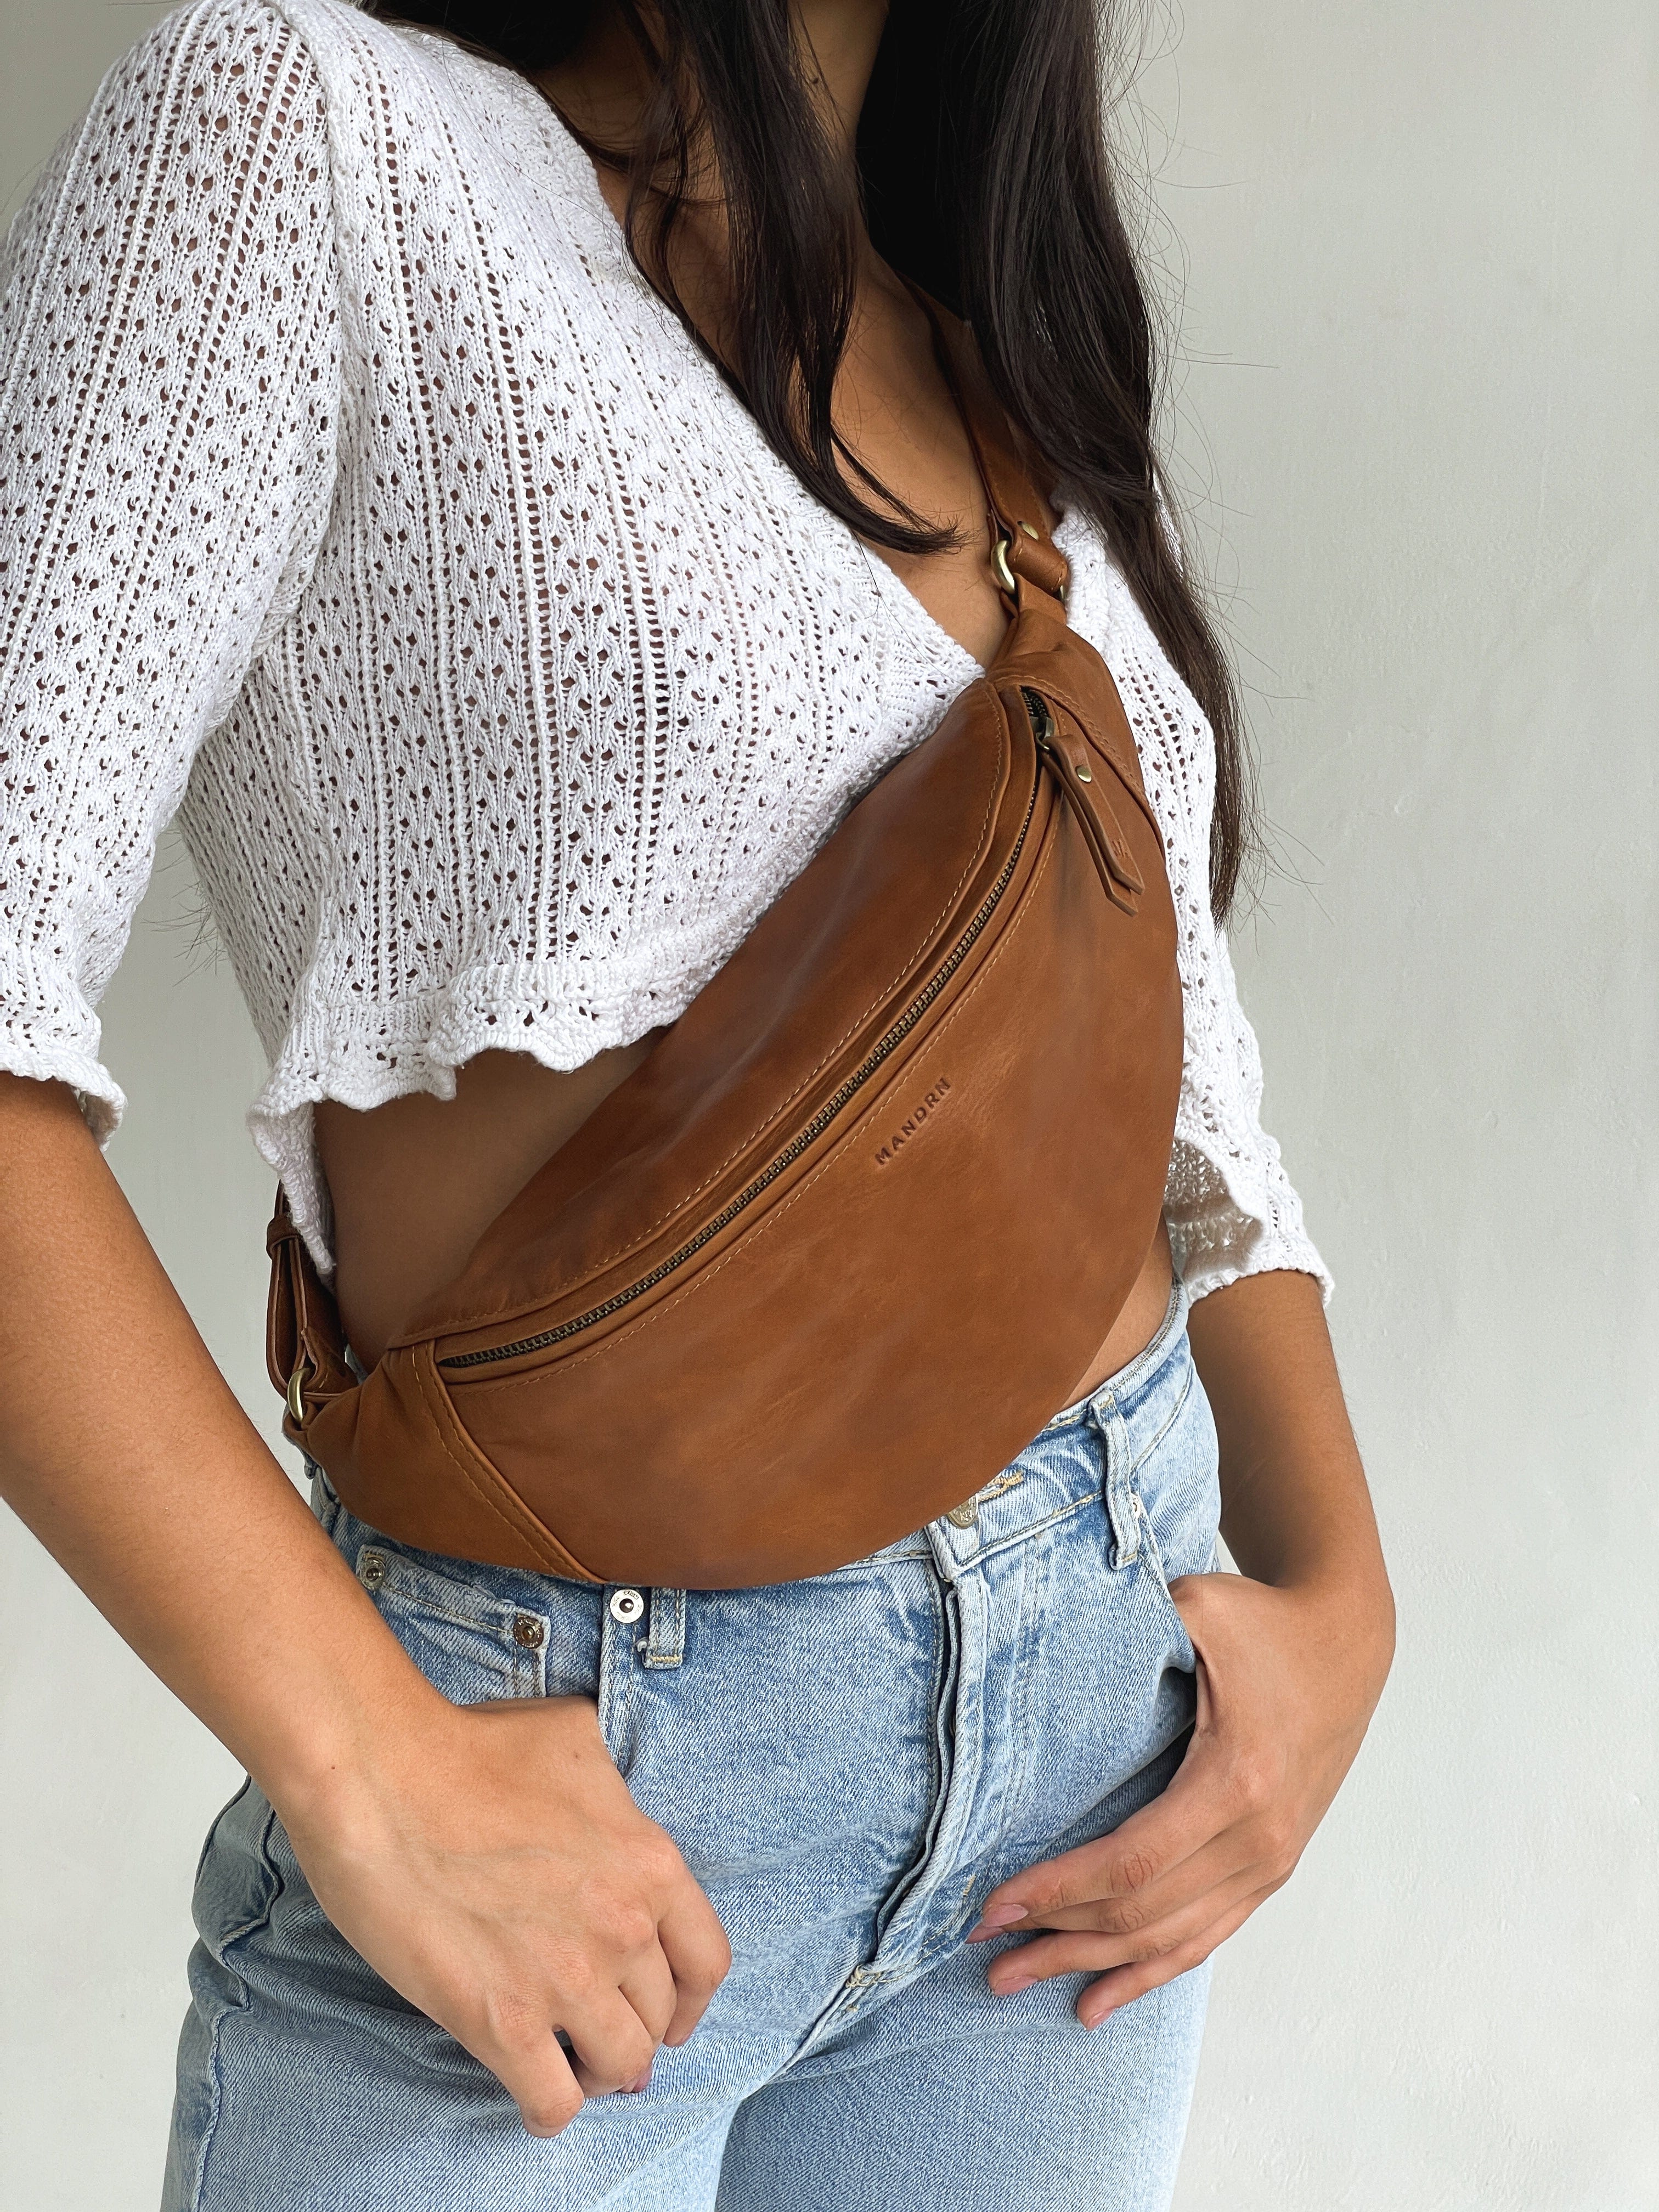 The Trendy Midriff Belt Is More About Style Than Functionality